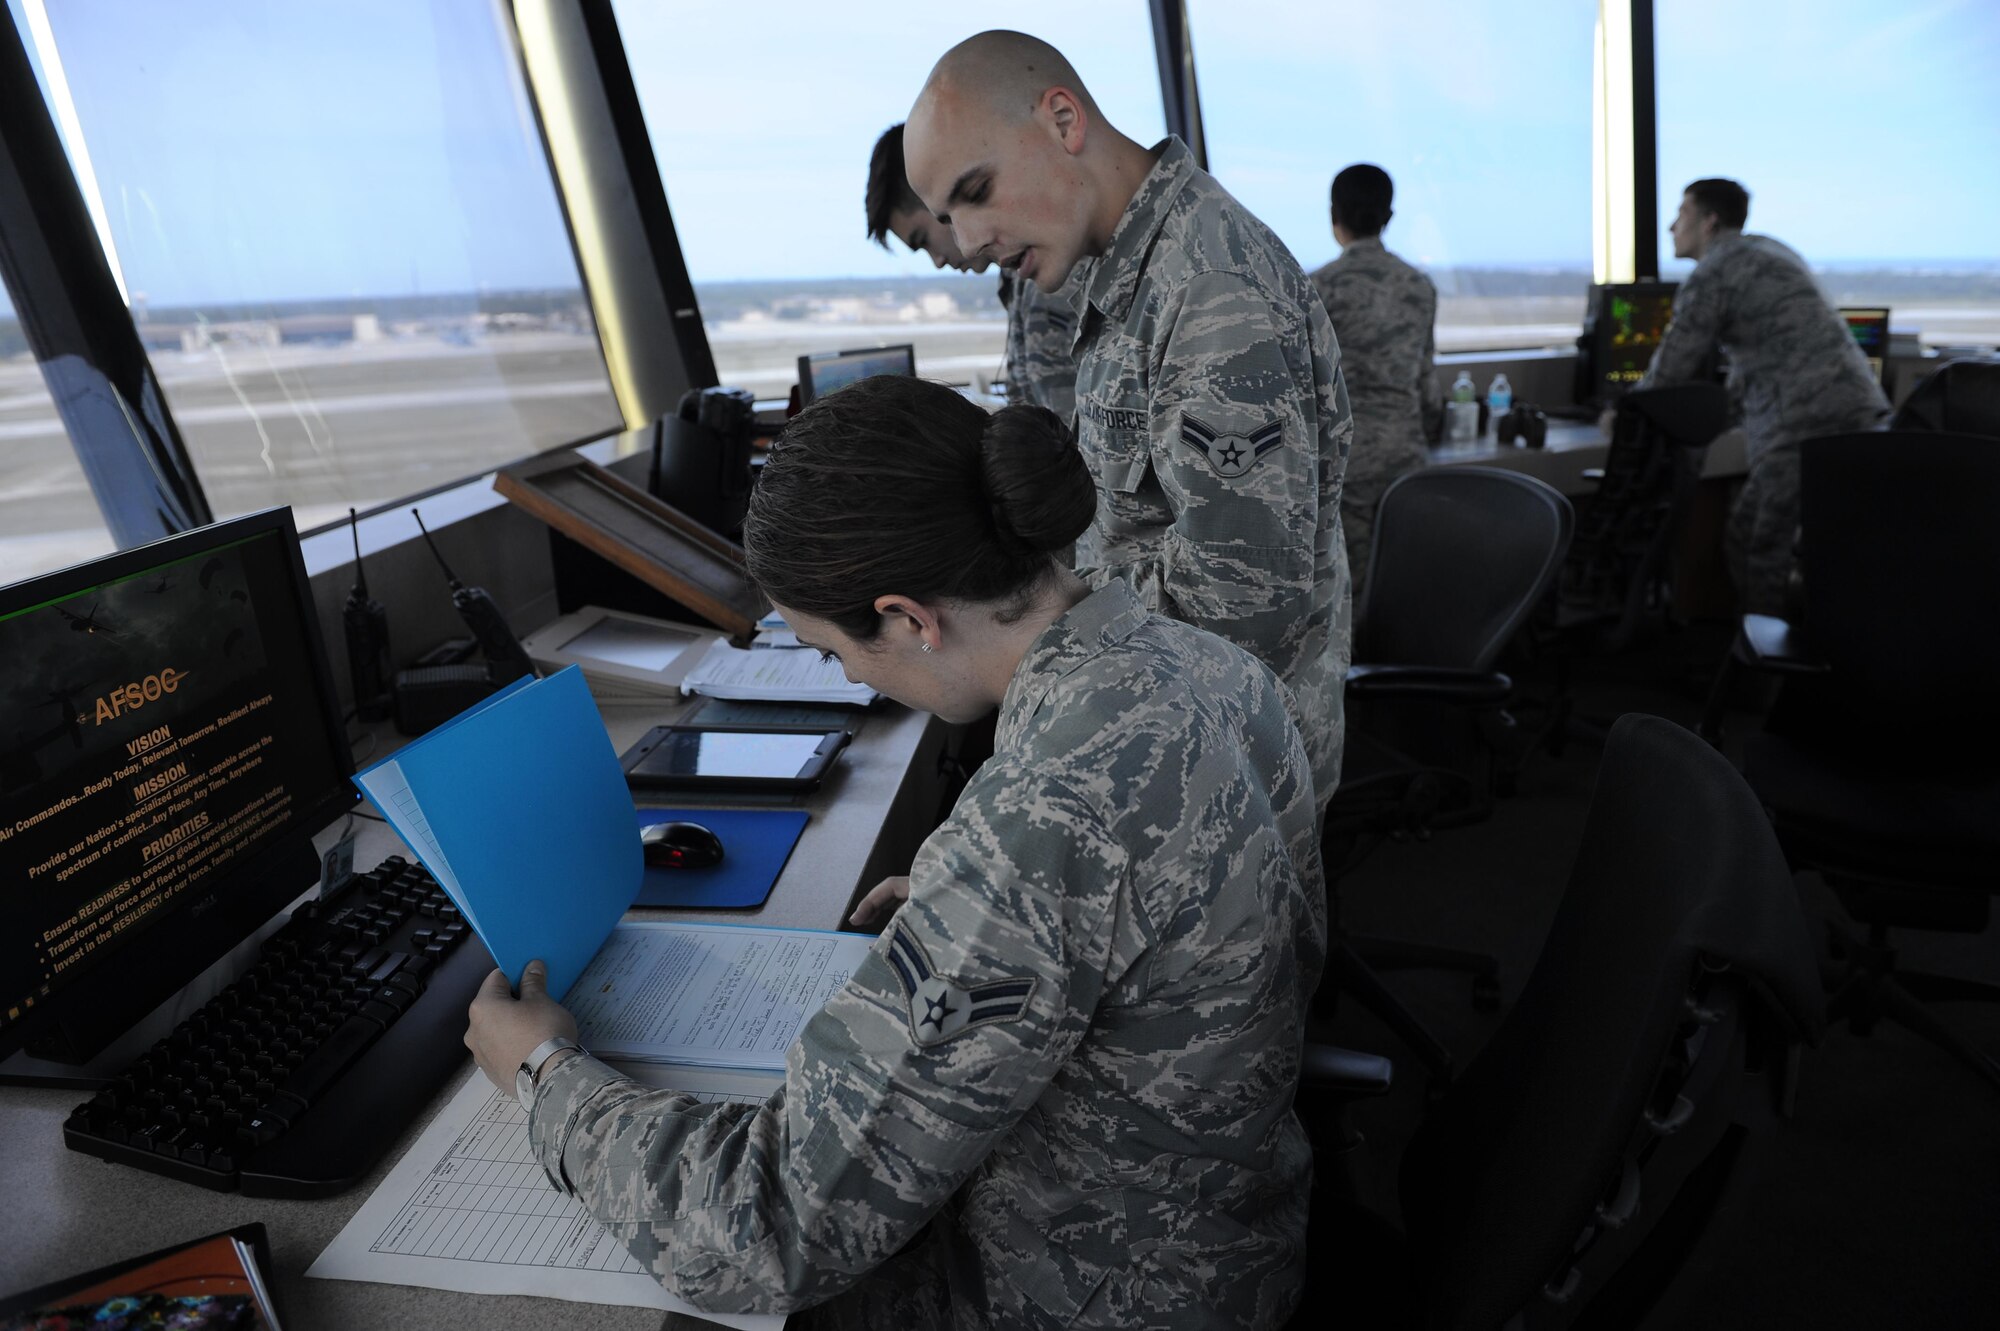 Airmen 1st Class Tristen Saucier and Chris Kondysar, air traffic control apprentices with the 1st Special Operations Support Squadron, update training records at Hurlburt Field, Fla., May 3, 2017. Air traffic controllers provide safe and organized flow of aircraft on the flight line and in the air by monitoring and keeping track of scheduled incoming and departing aircraft. (U.S. Air Force photo by Airman 1st Class Isaac O. Guest IV)